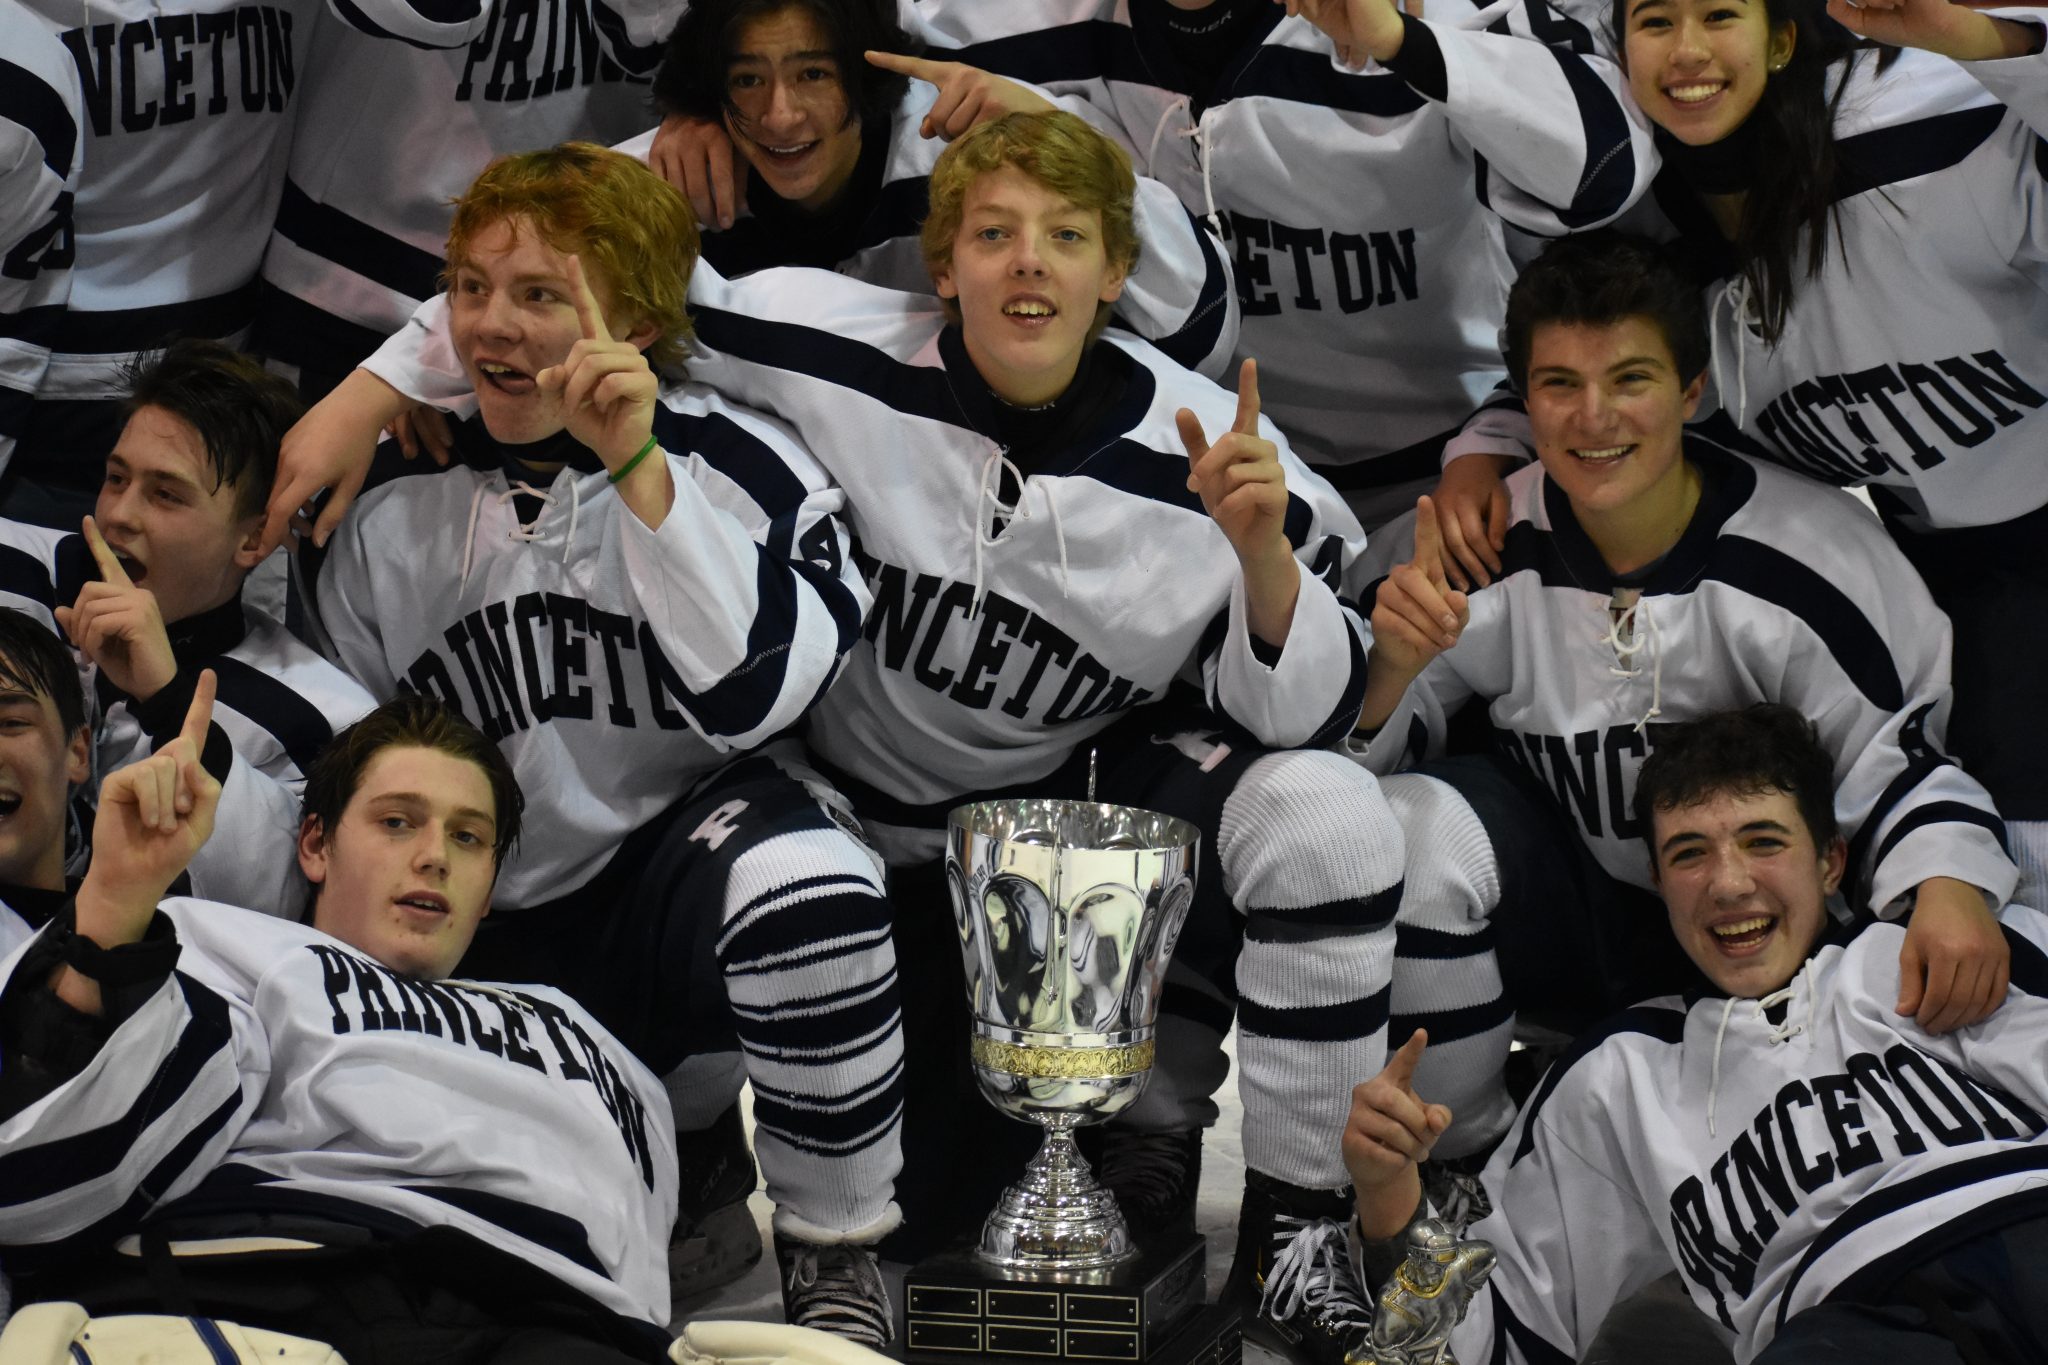 Princeton High ice hockey champions now focus on state tournament